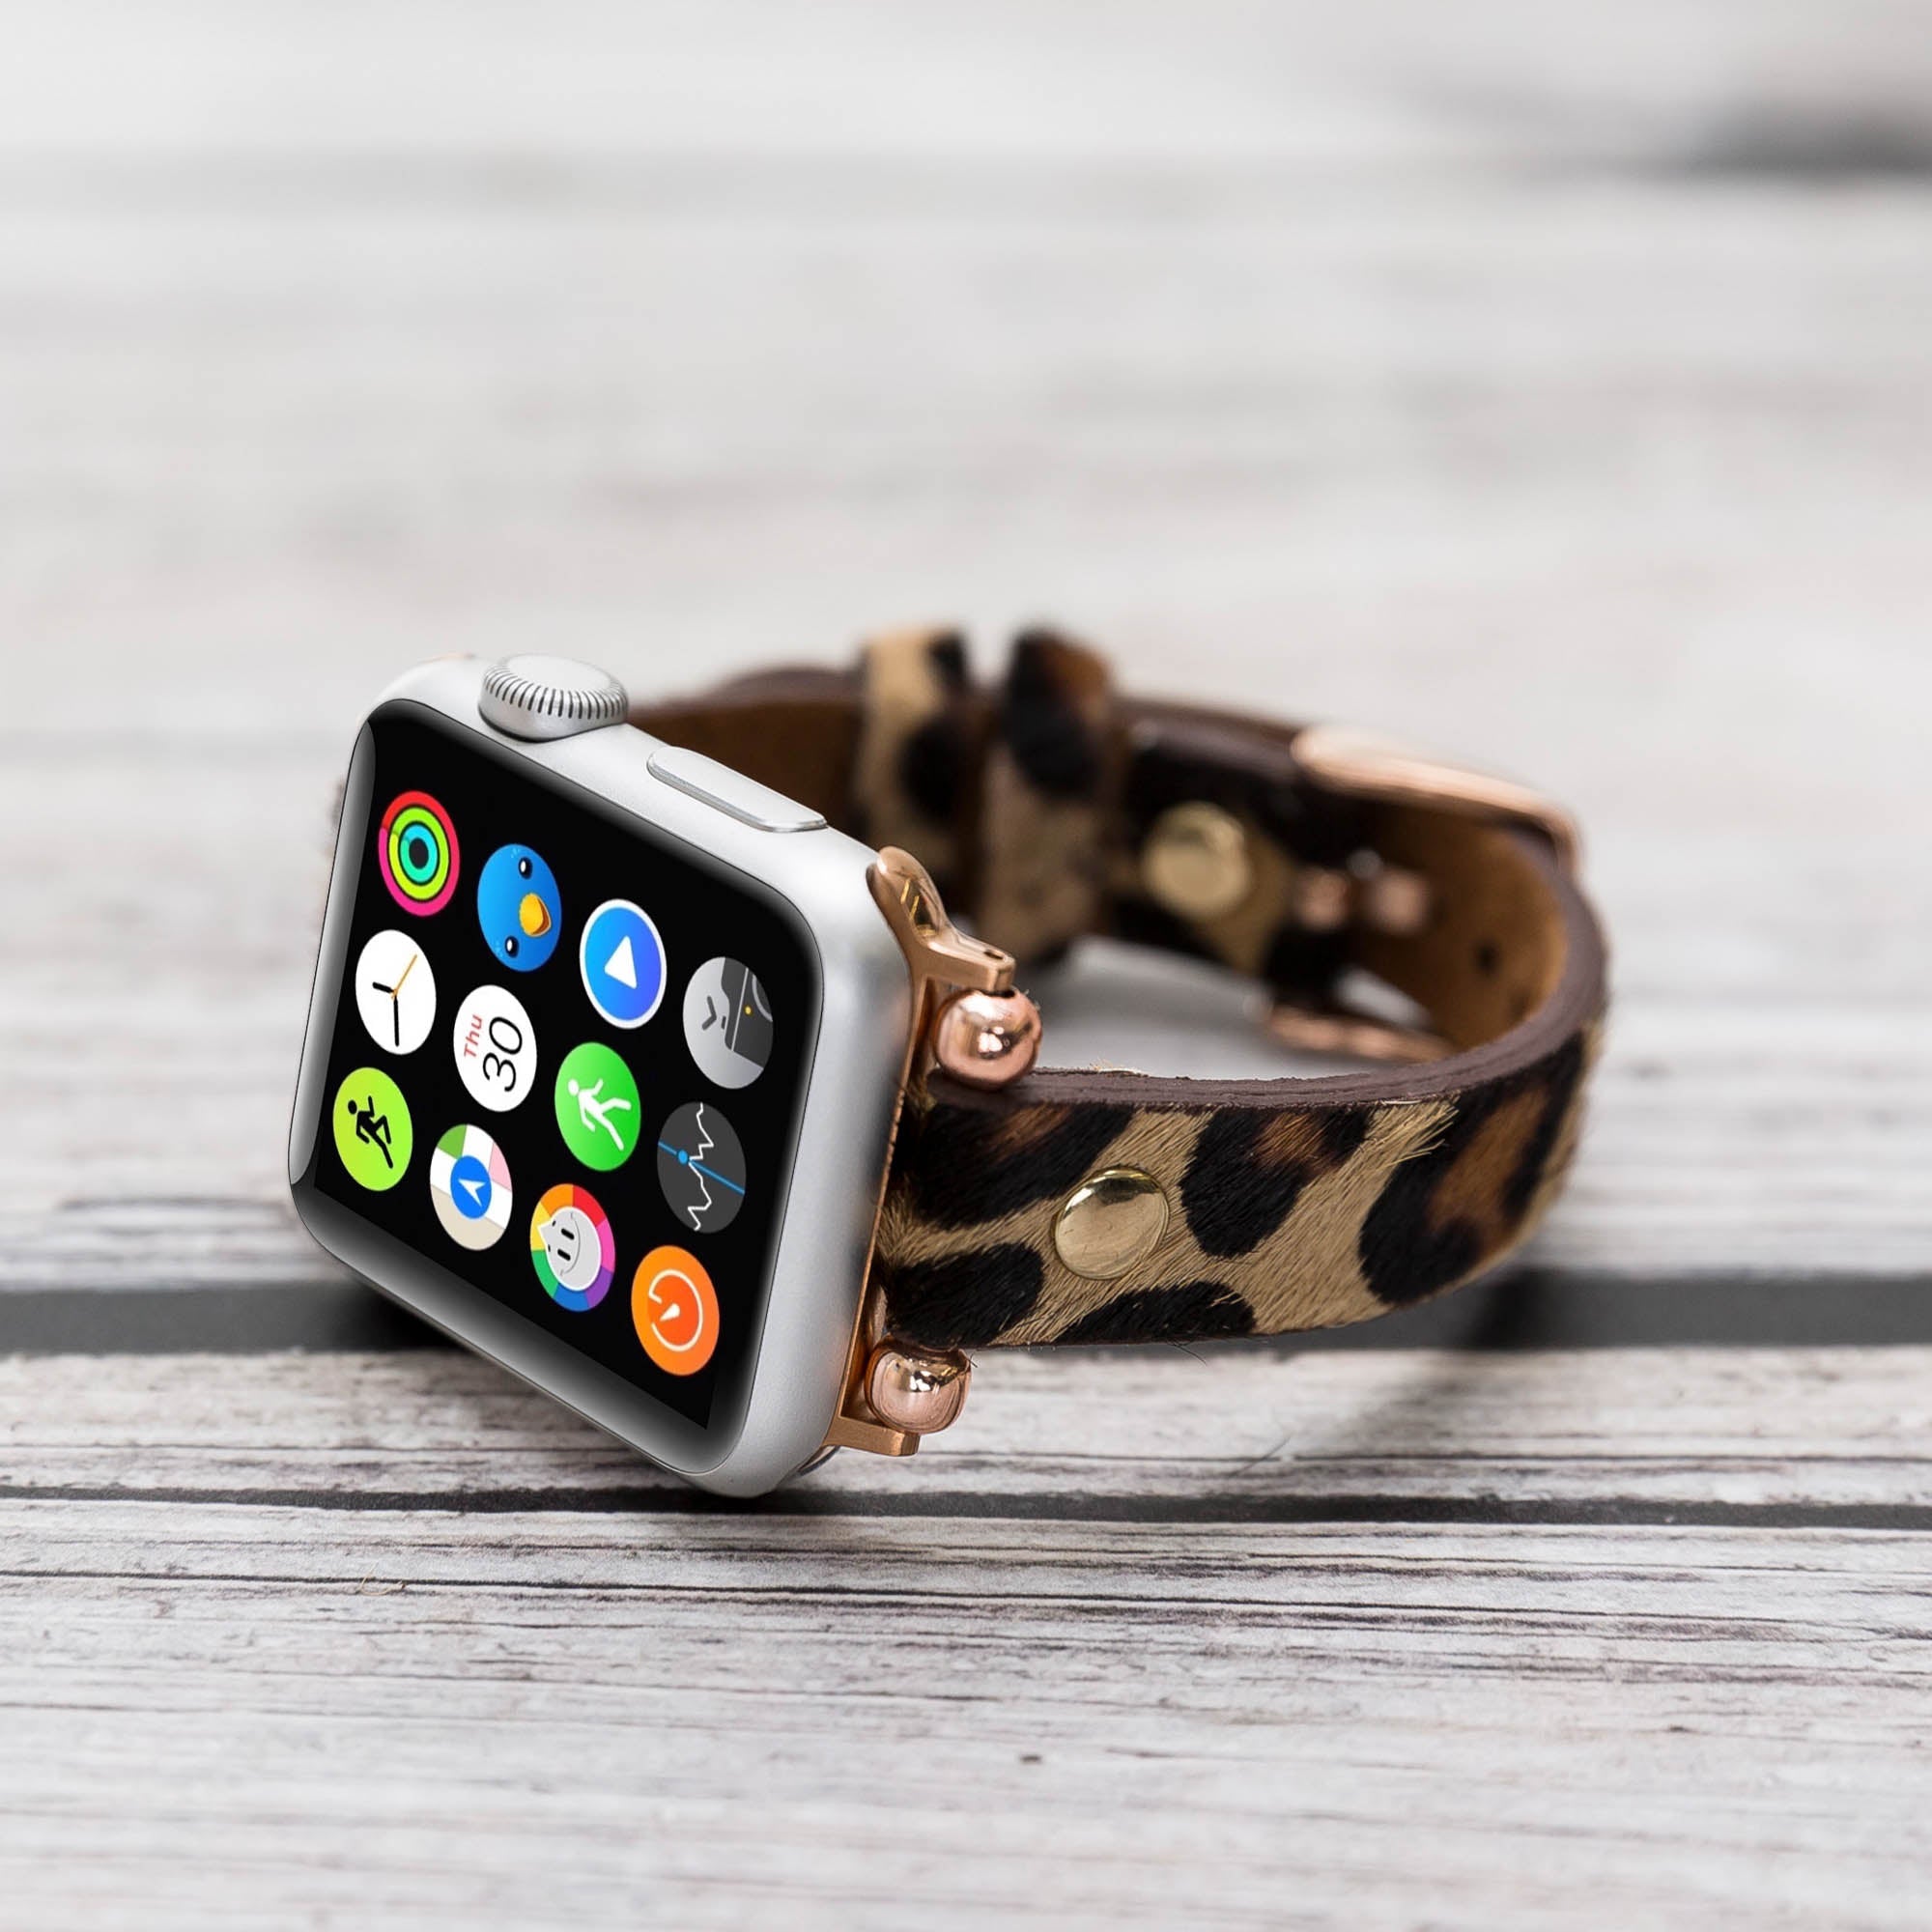 Ferro Strap - Full Grain Leather Band for Apple Watch - FURRY LEOPARD PATTERNED - saracleather